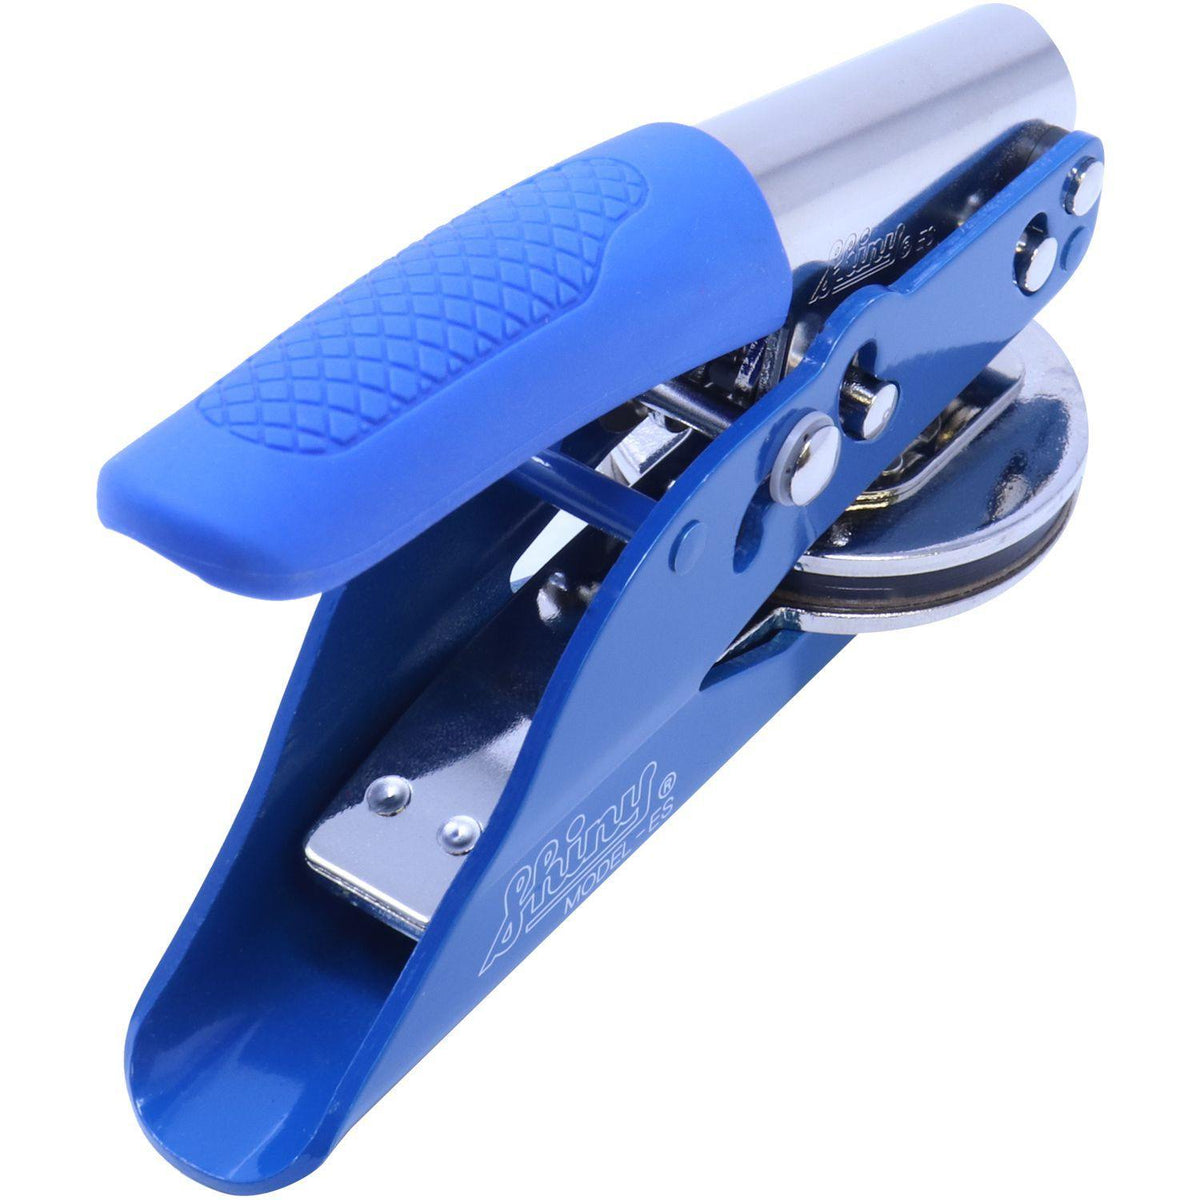 Geologist Blue Soft Seal Handheld Embosser - Engineer Seal Stamps - Embosser Type_Handheld, Embosser Type_Soft Seal, Type of Use_Professional